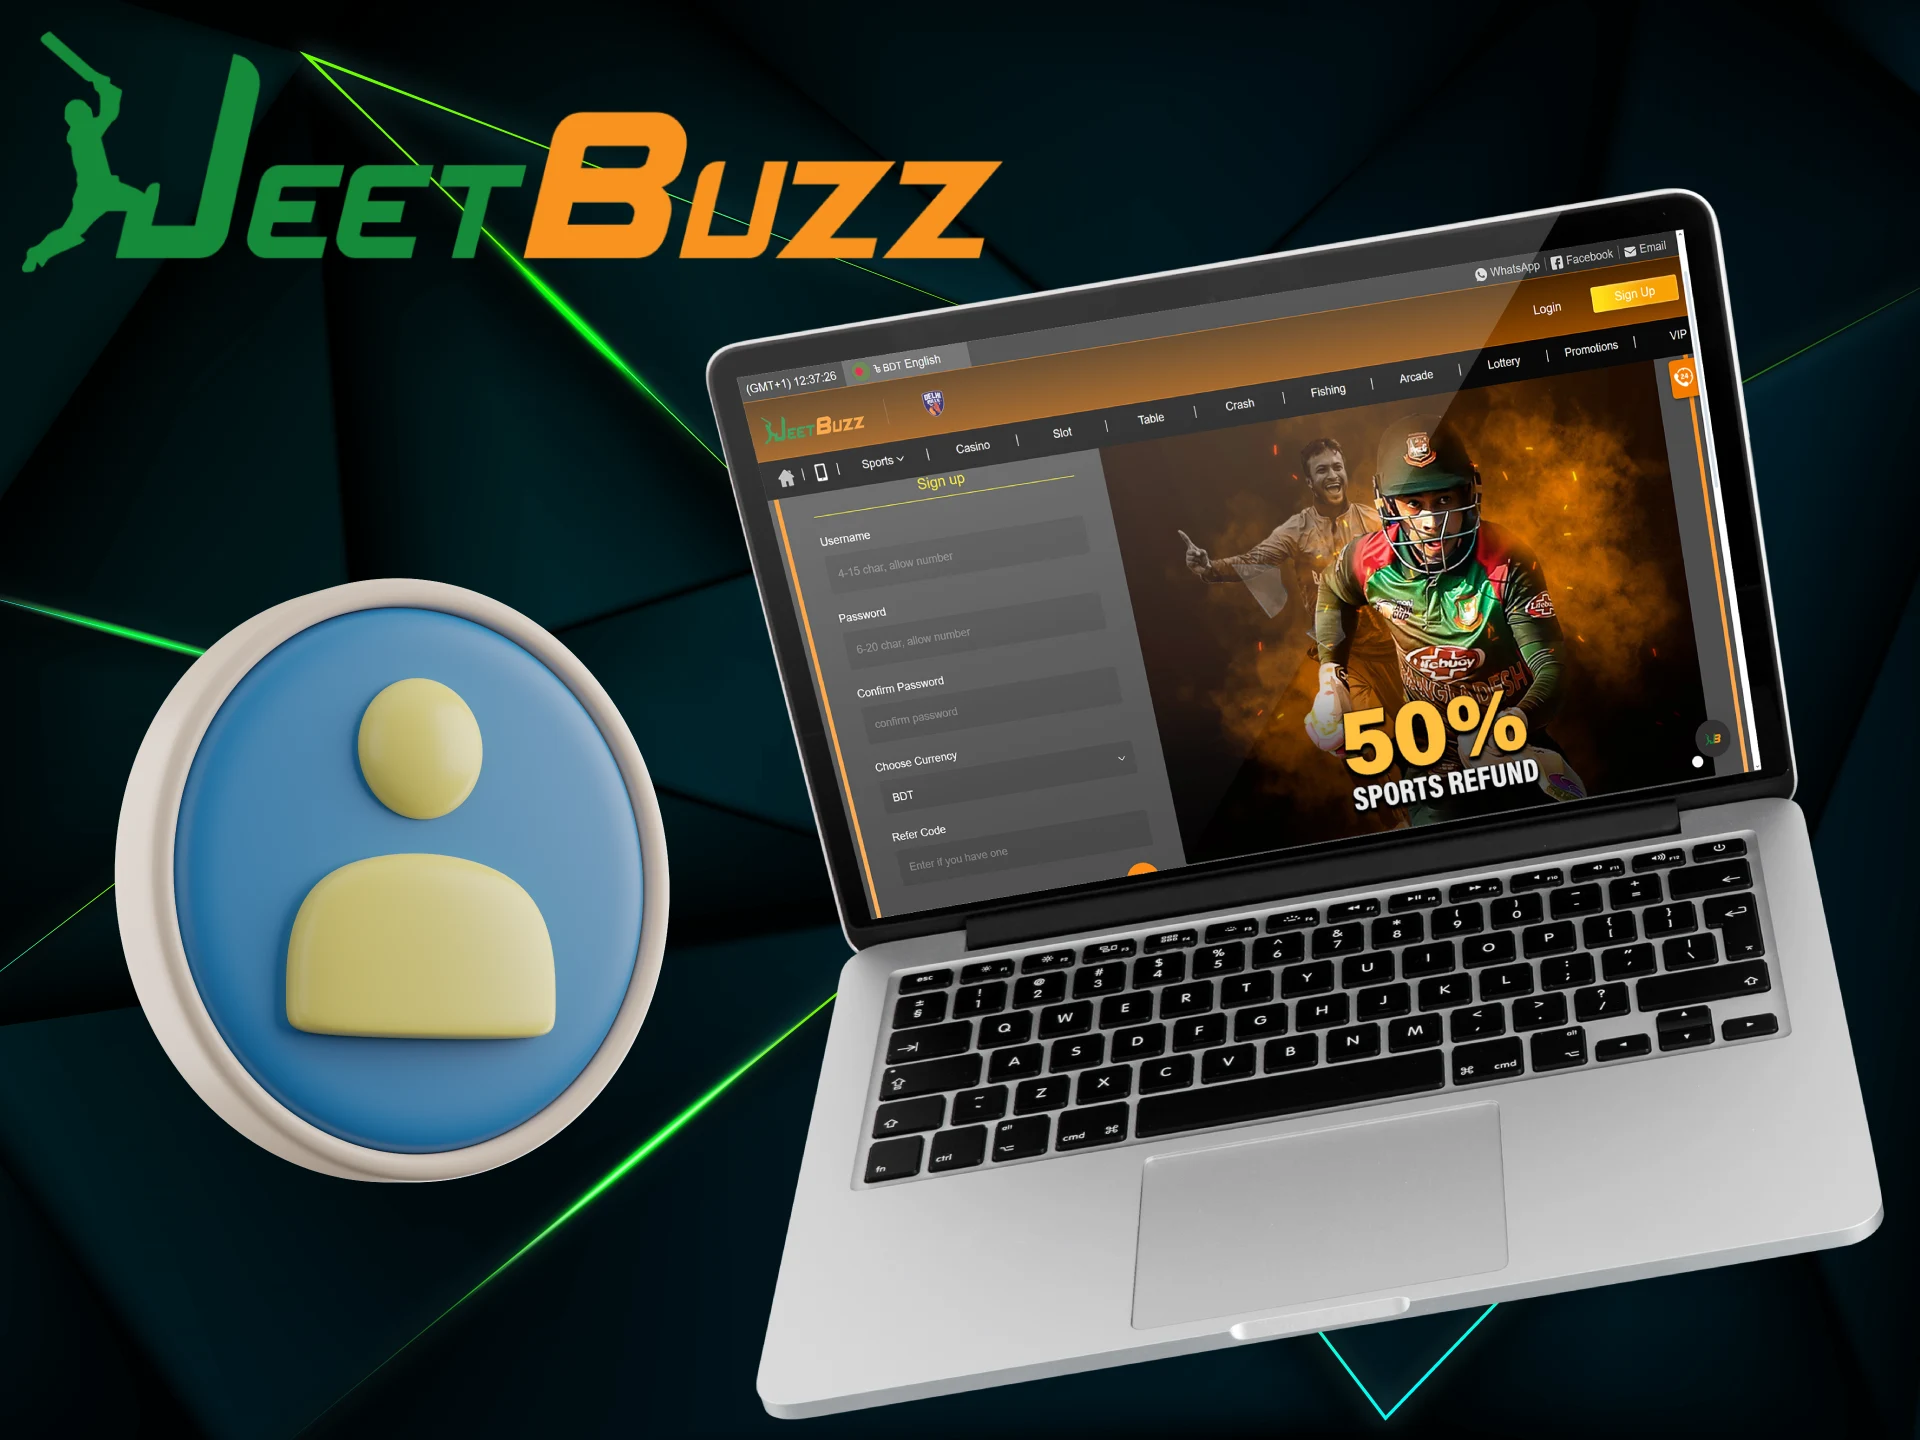 All JeetBuzz Bangladesh players are required to register an account in order to use our services, place bets and play casino games.